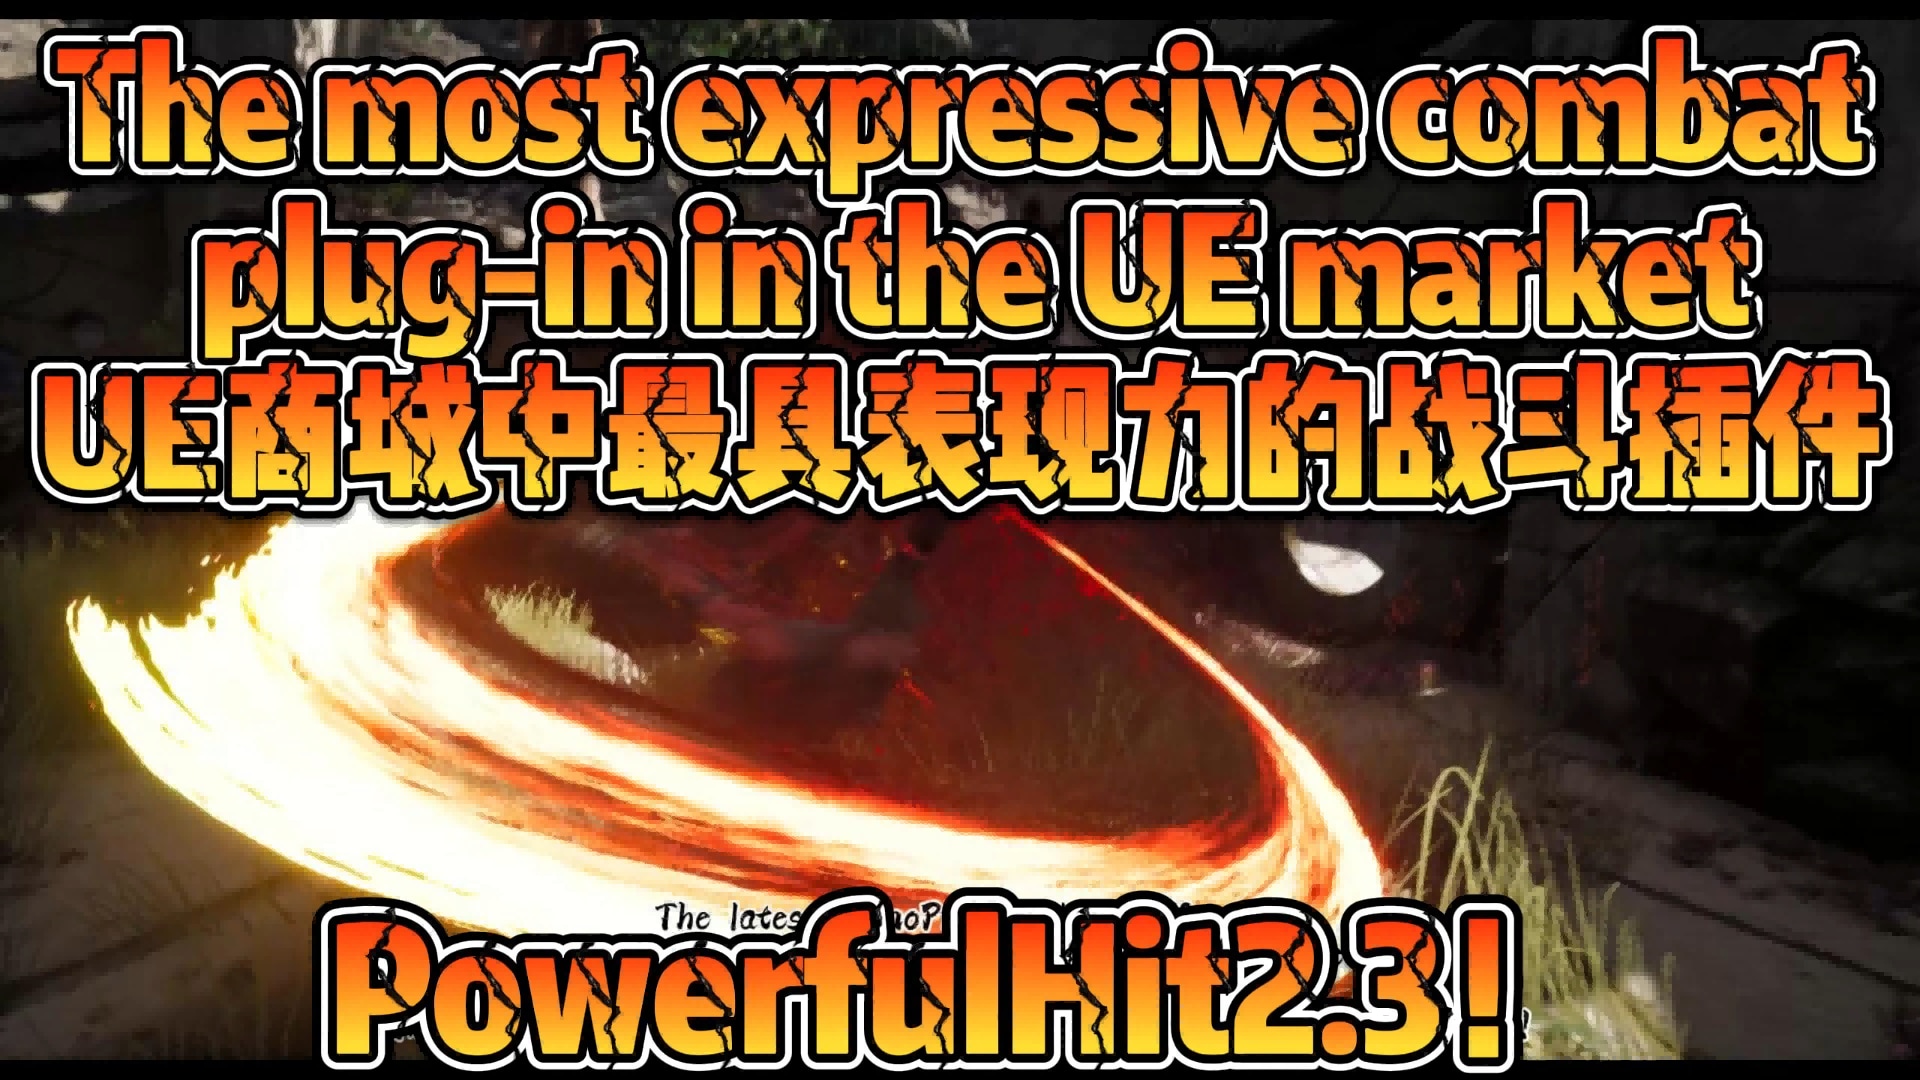 GBWPowerfulHit - Most expressive combat system in the Market. Multiplayer Ready.